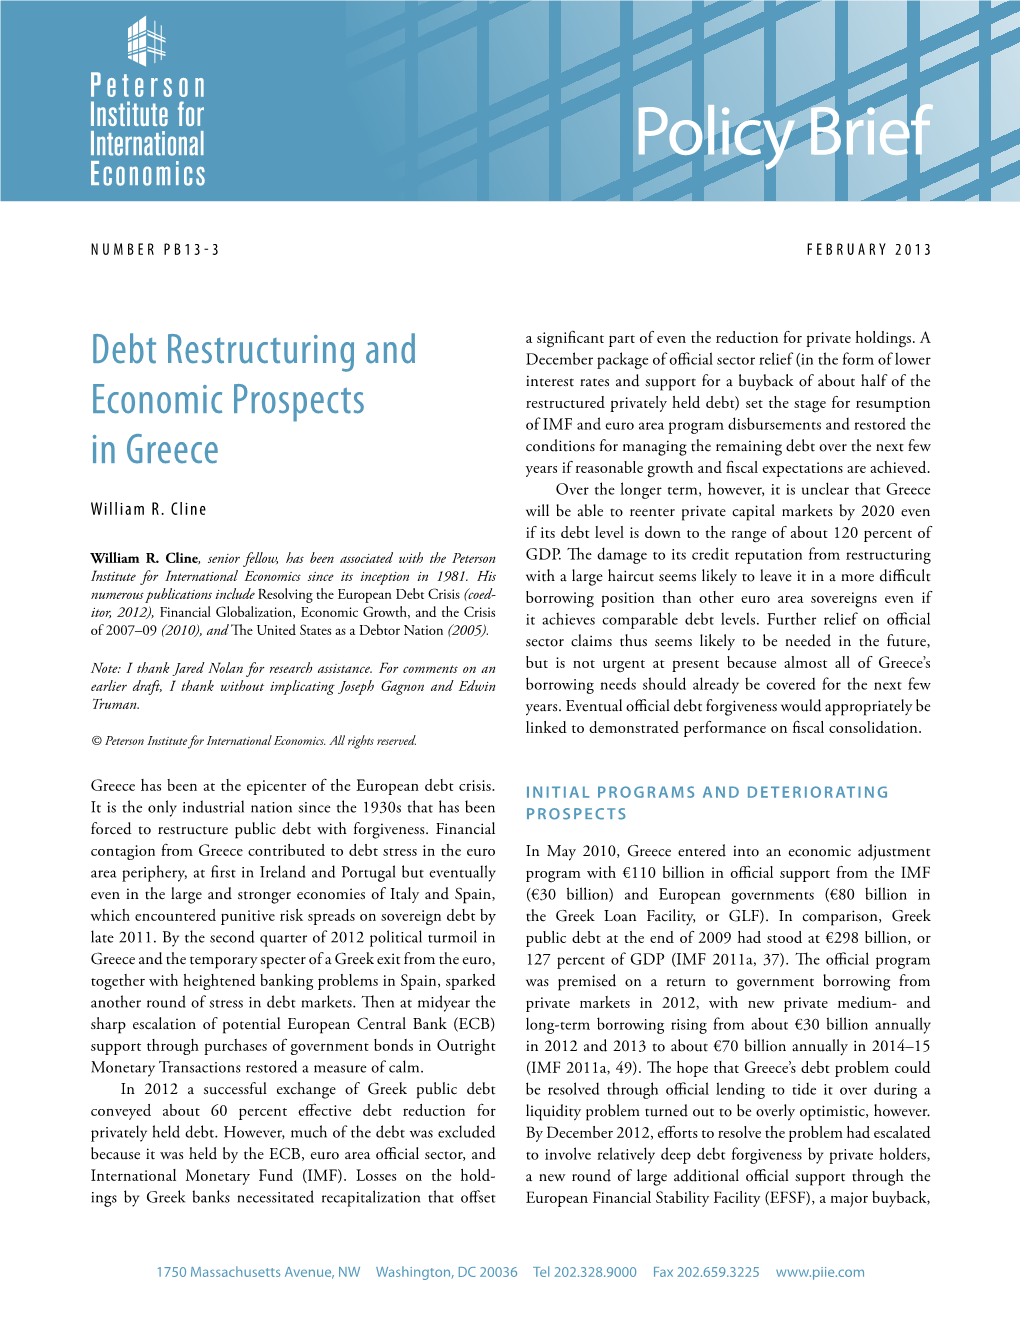 Policy Brief 13-3: Debt Restructuring and Economic Prospects in Greece